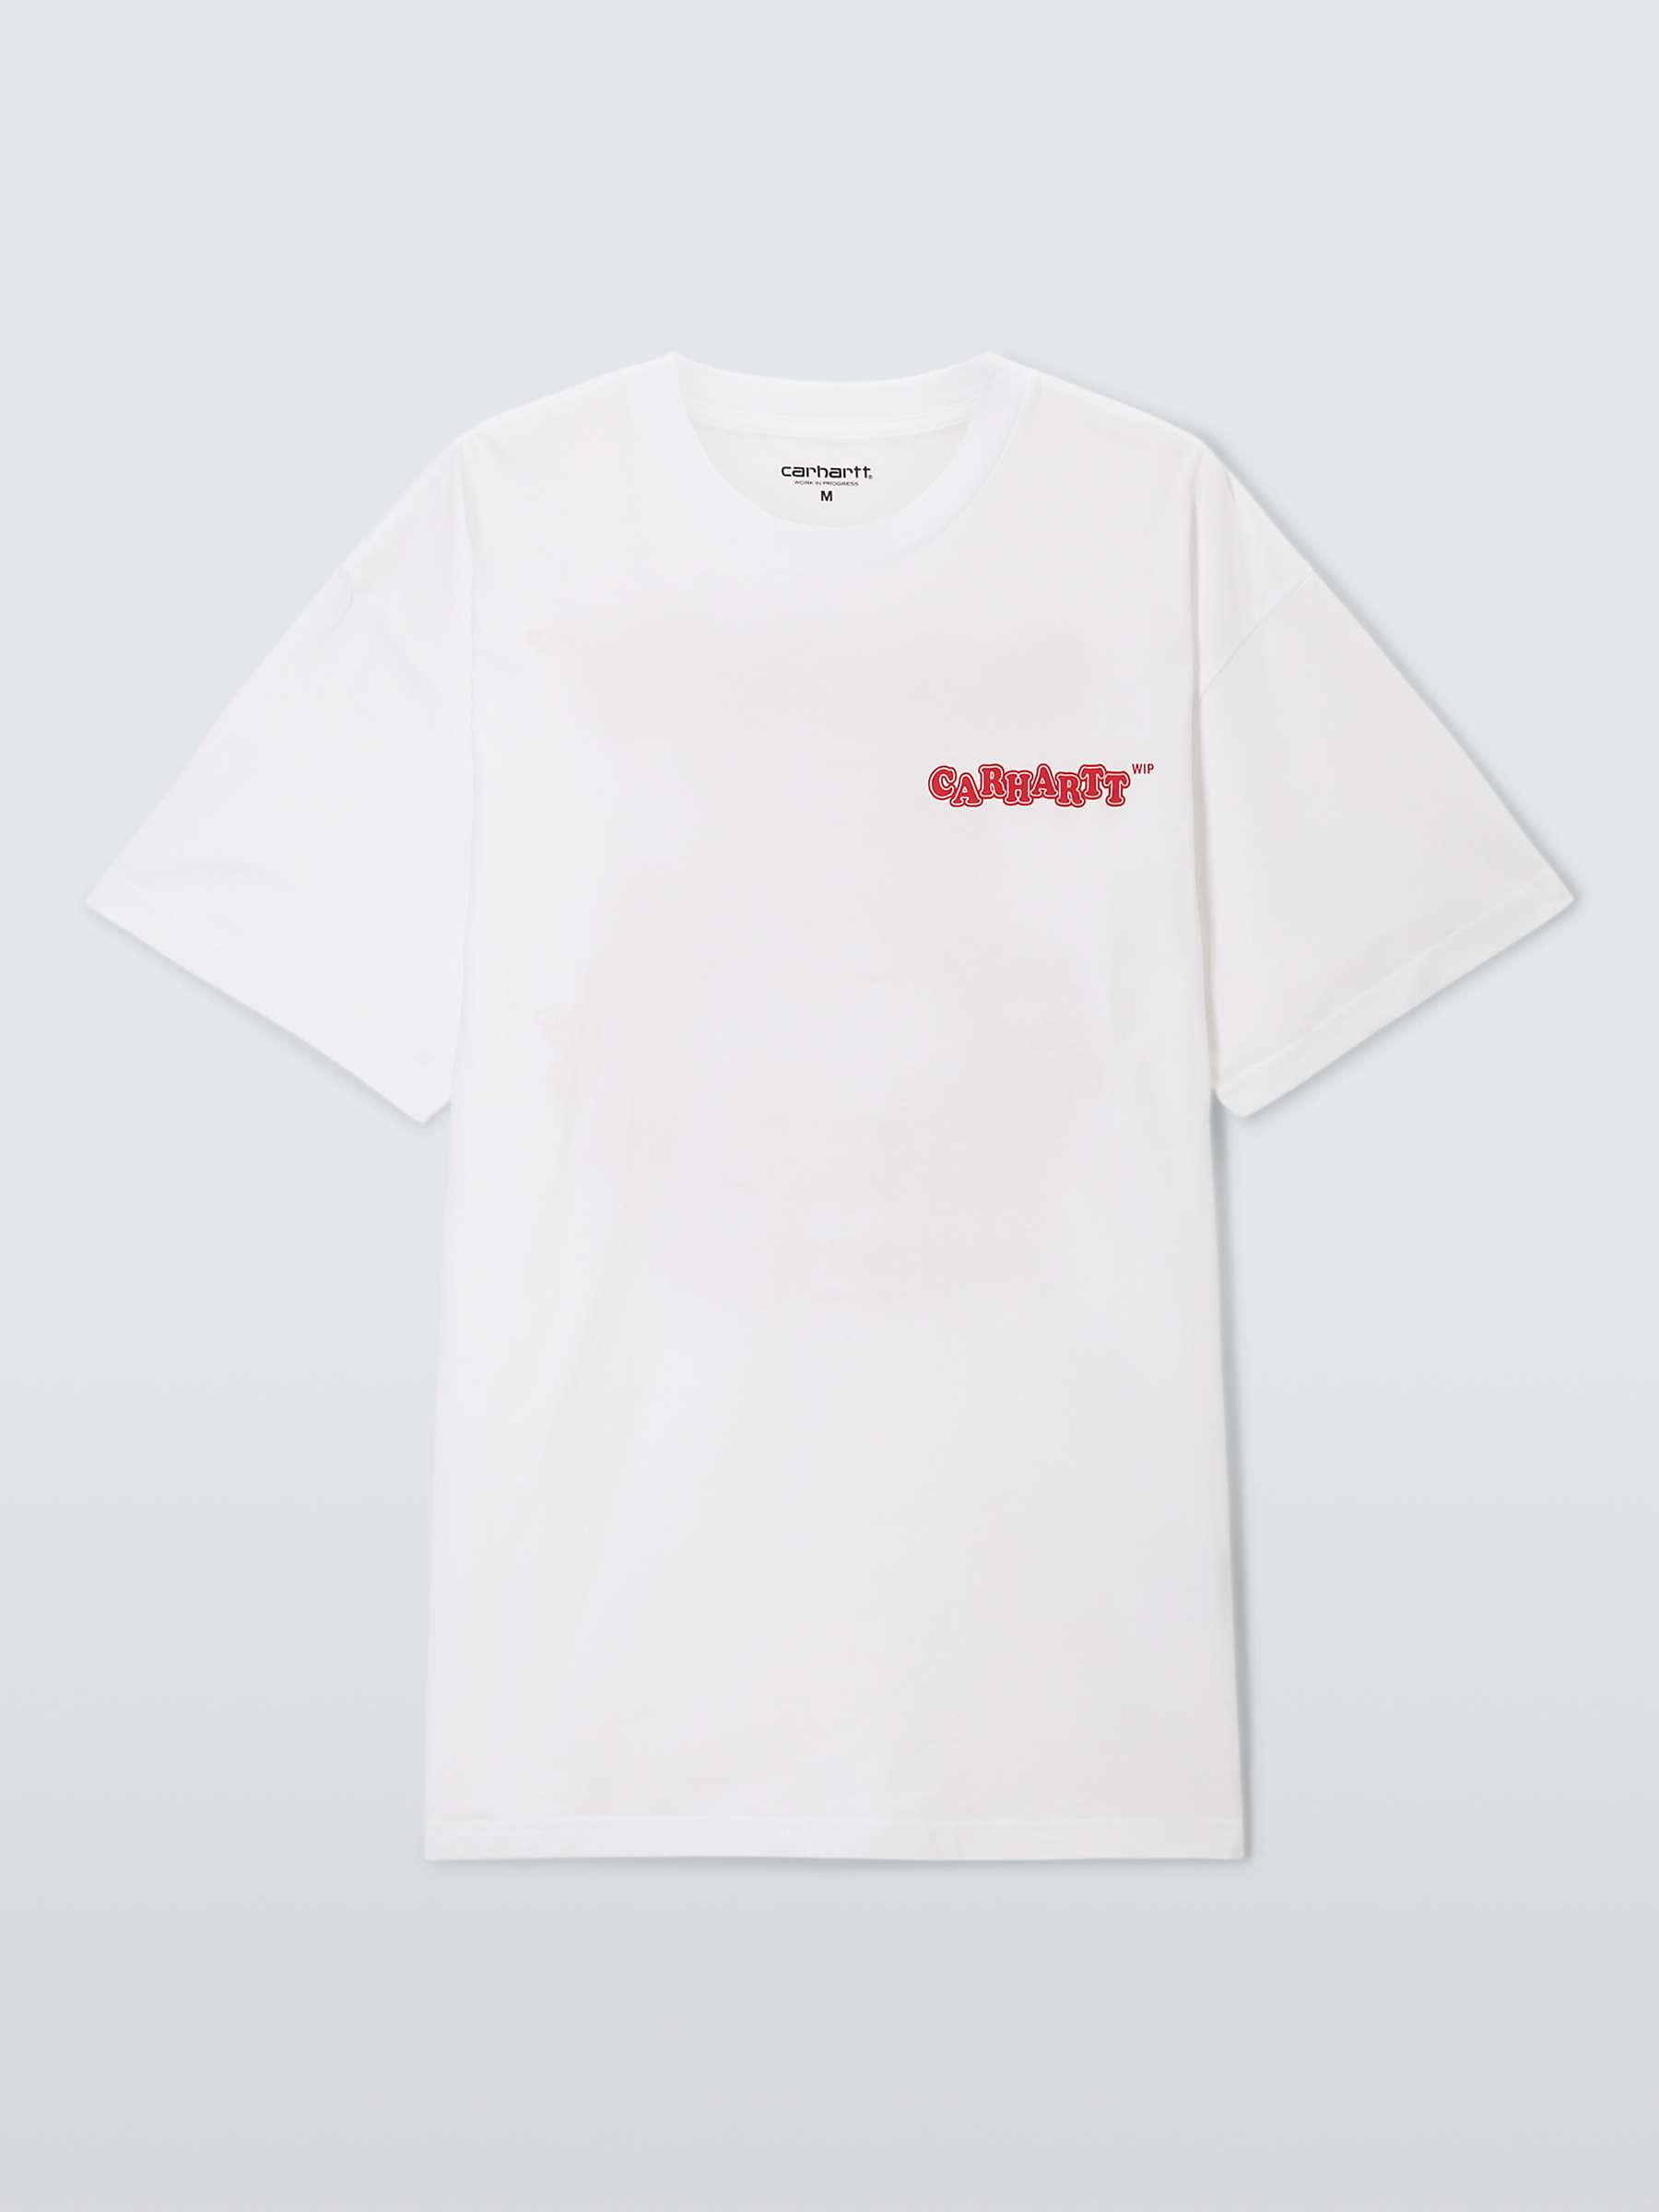 Buy Carhartt WIP Short Sleeve Fast Food T-Shirt, White/Red Online at johnlewis.com